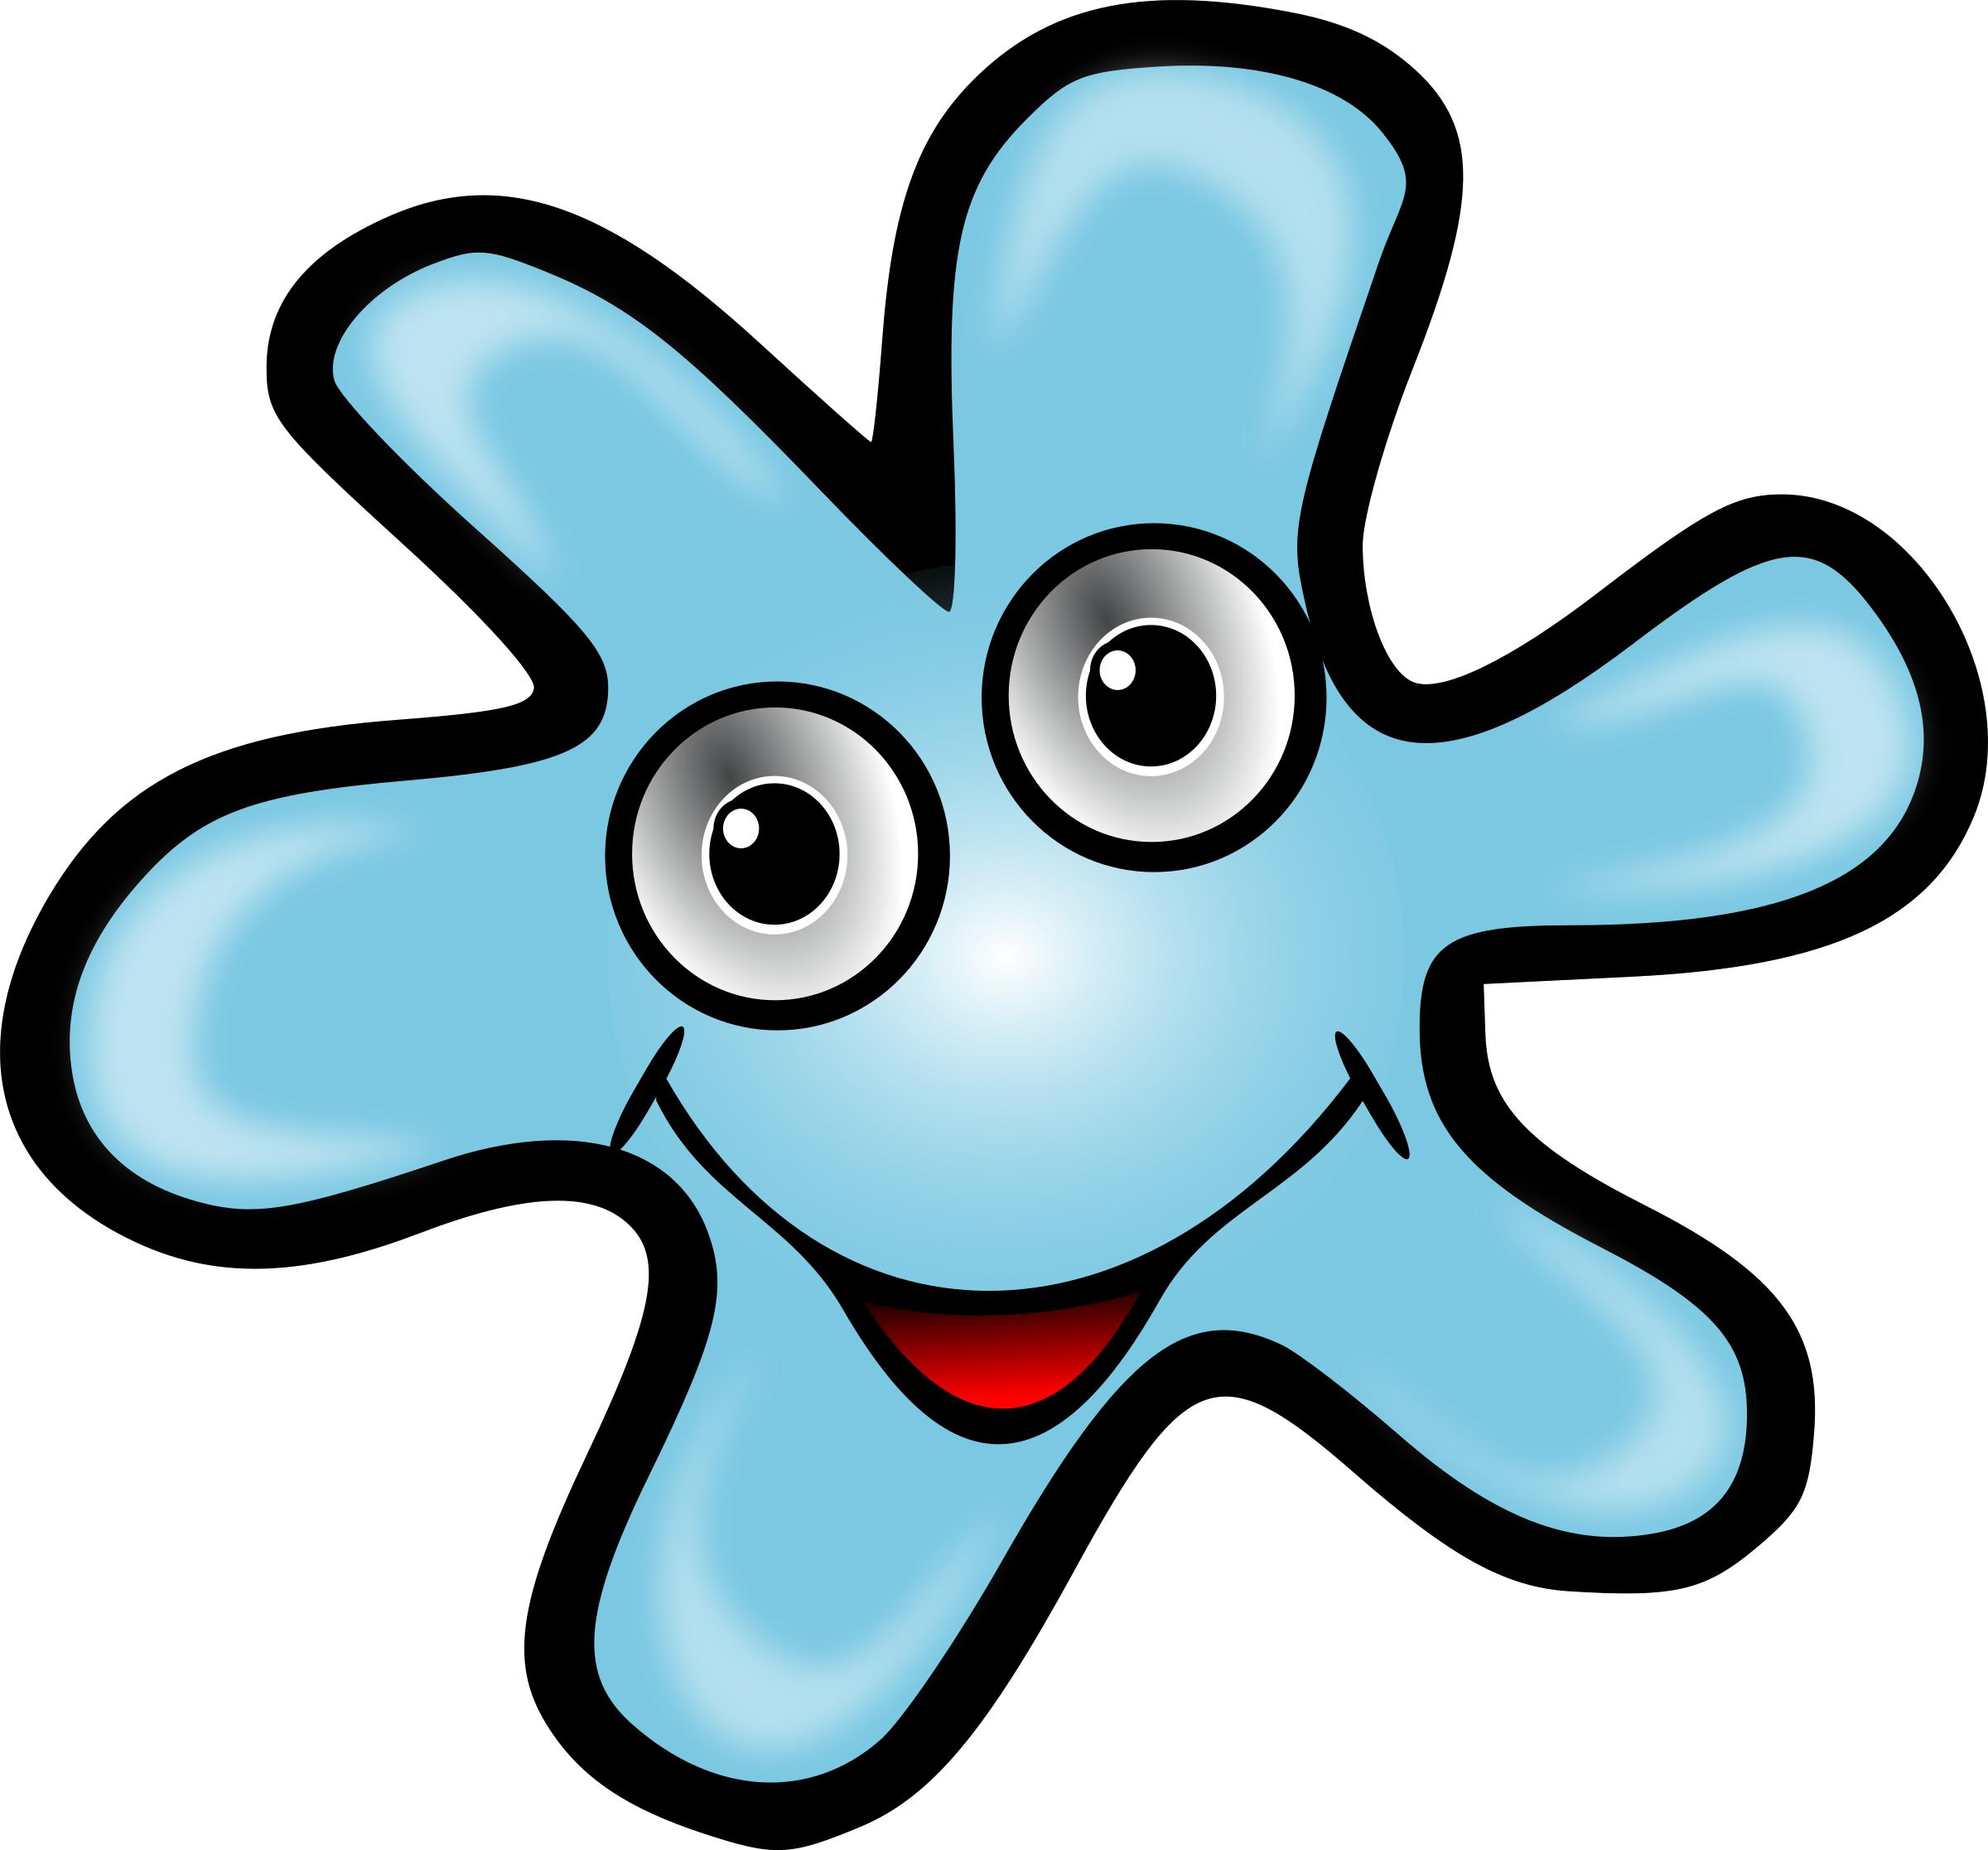 Other funny bacteria png